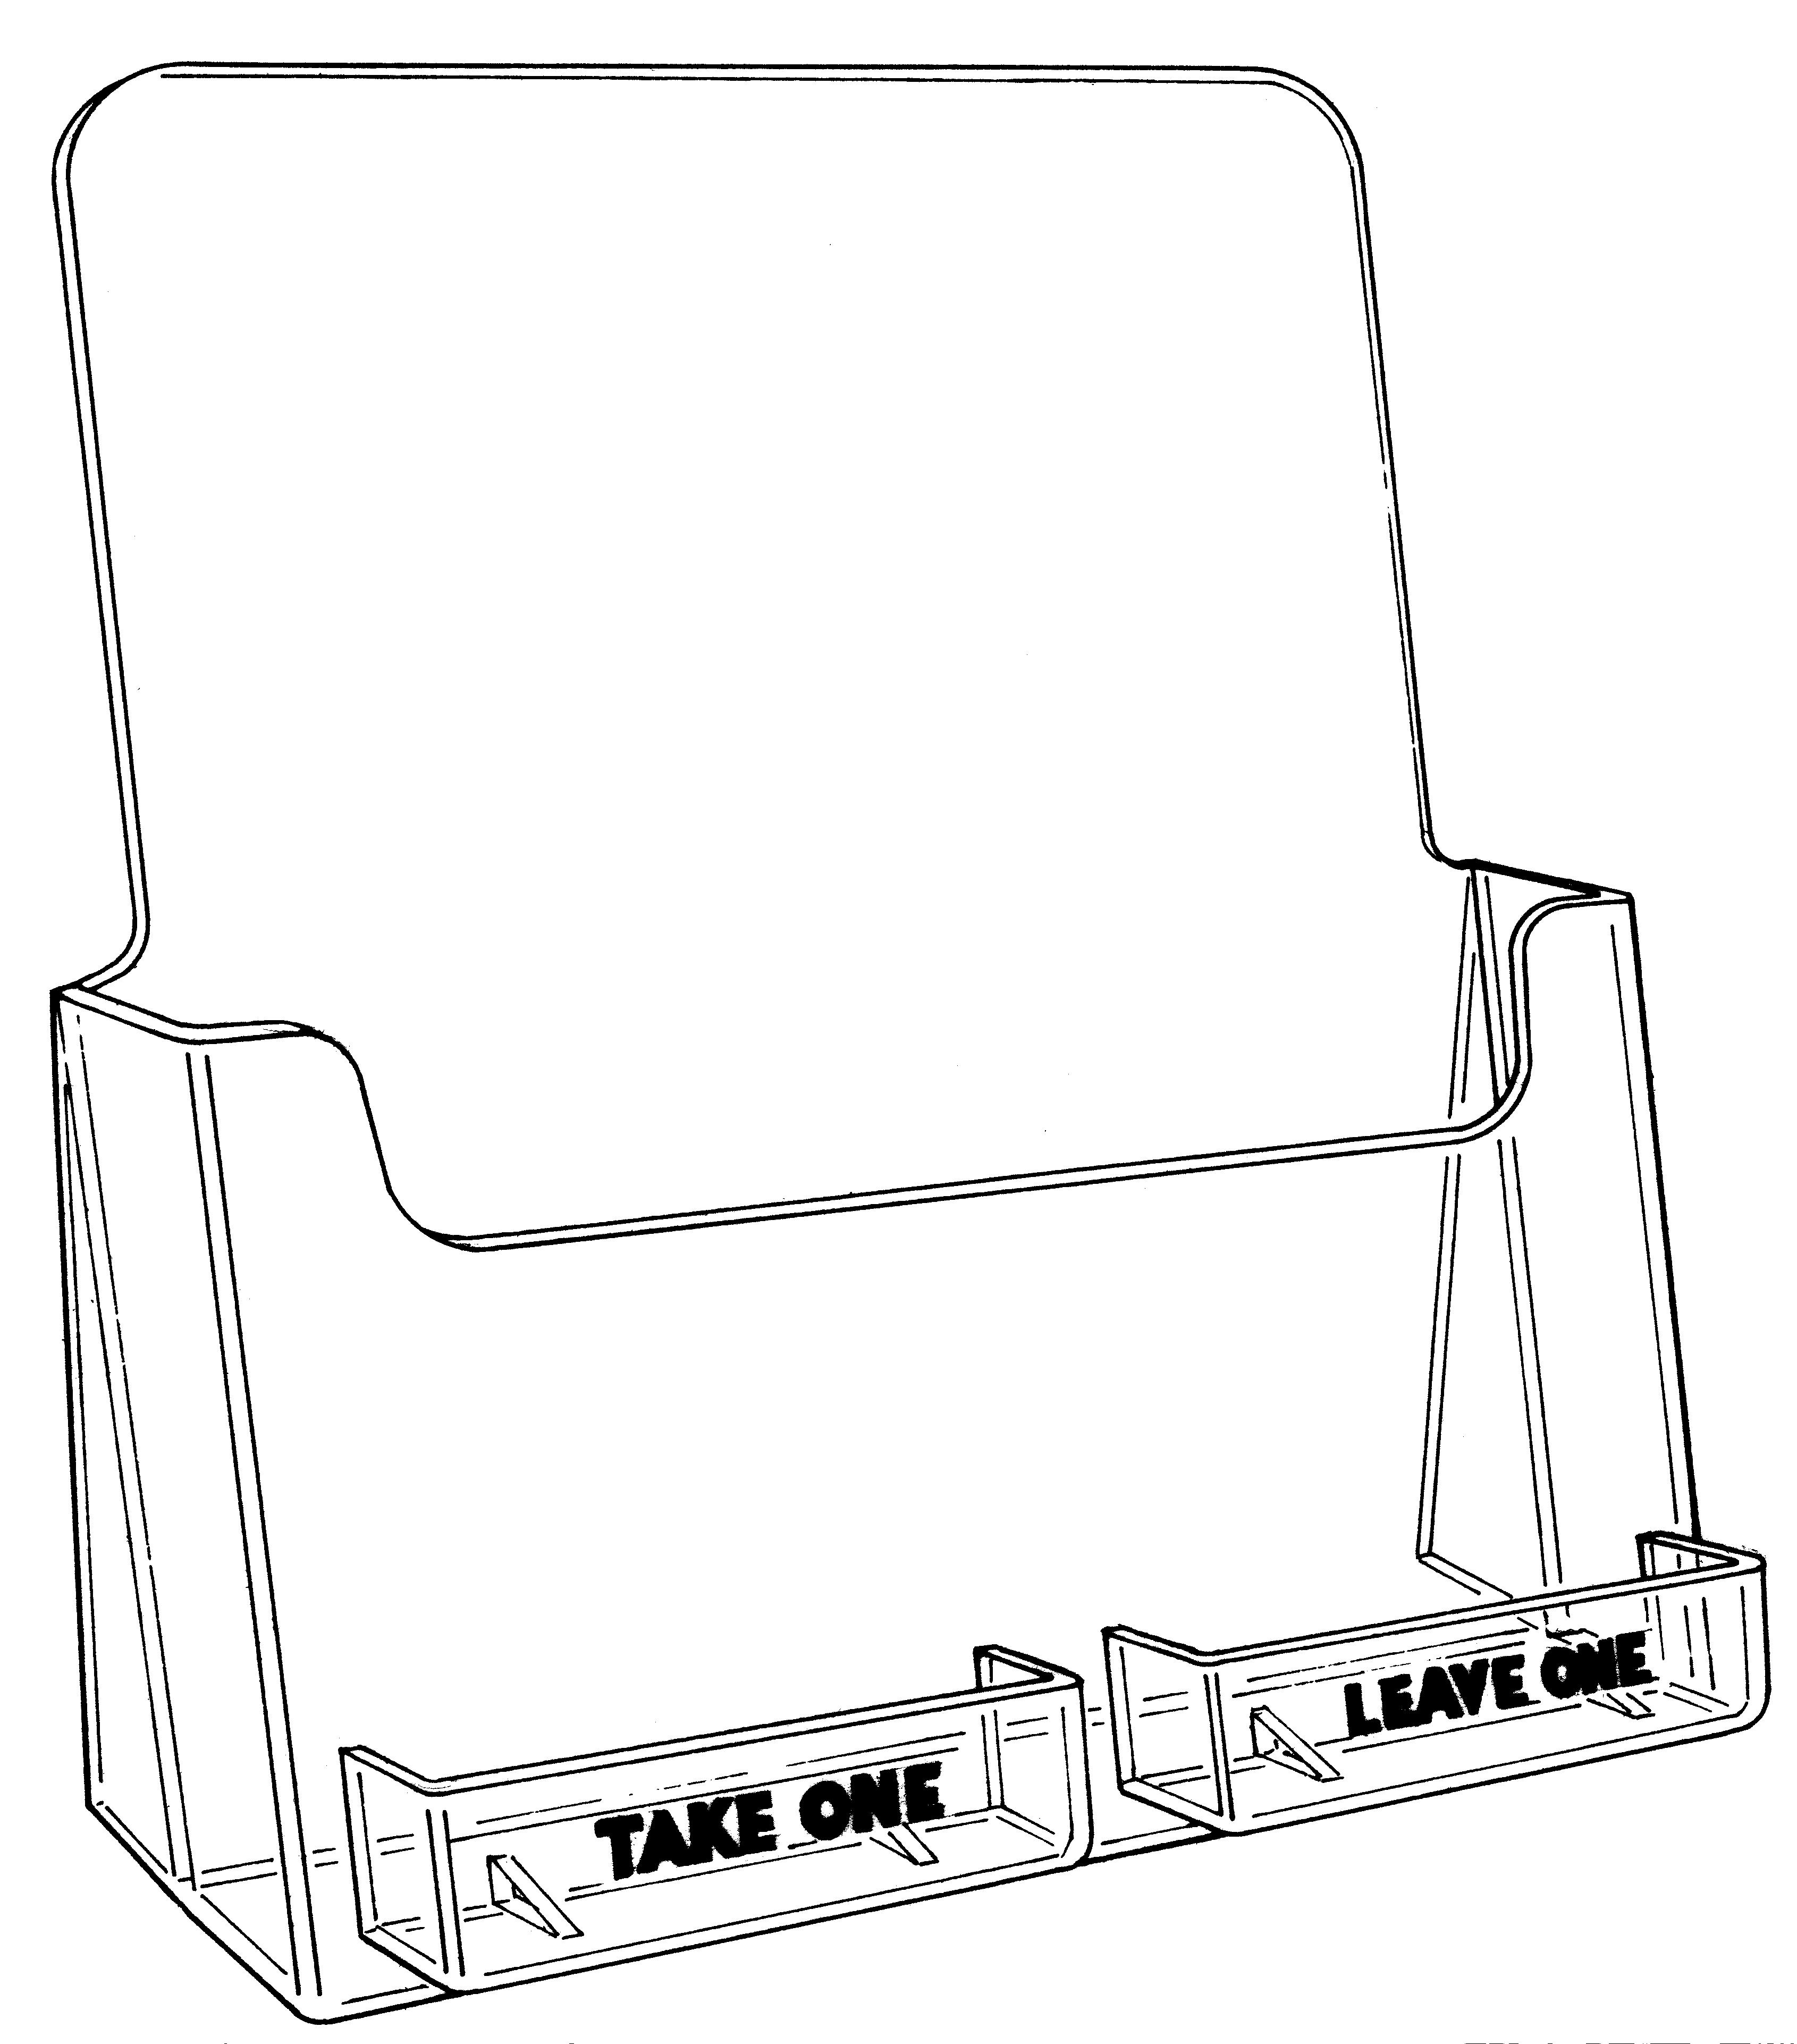 Take One,Leave One,Flyer/Card Holder.        Categ  12-99